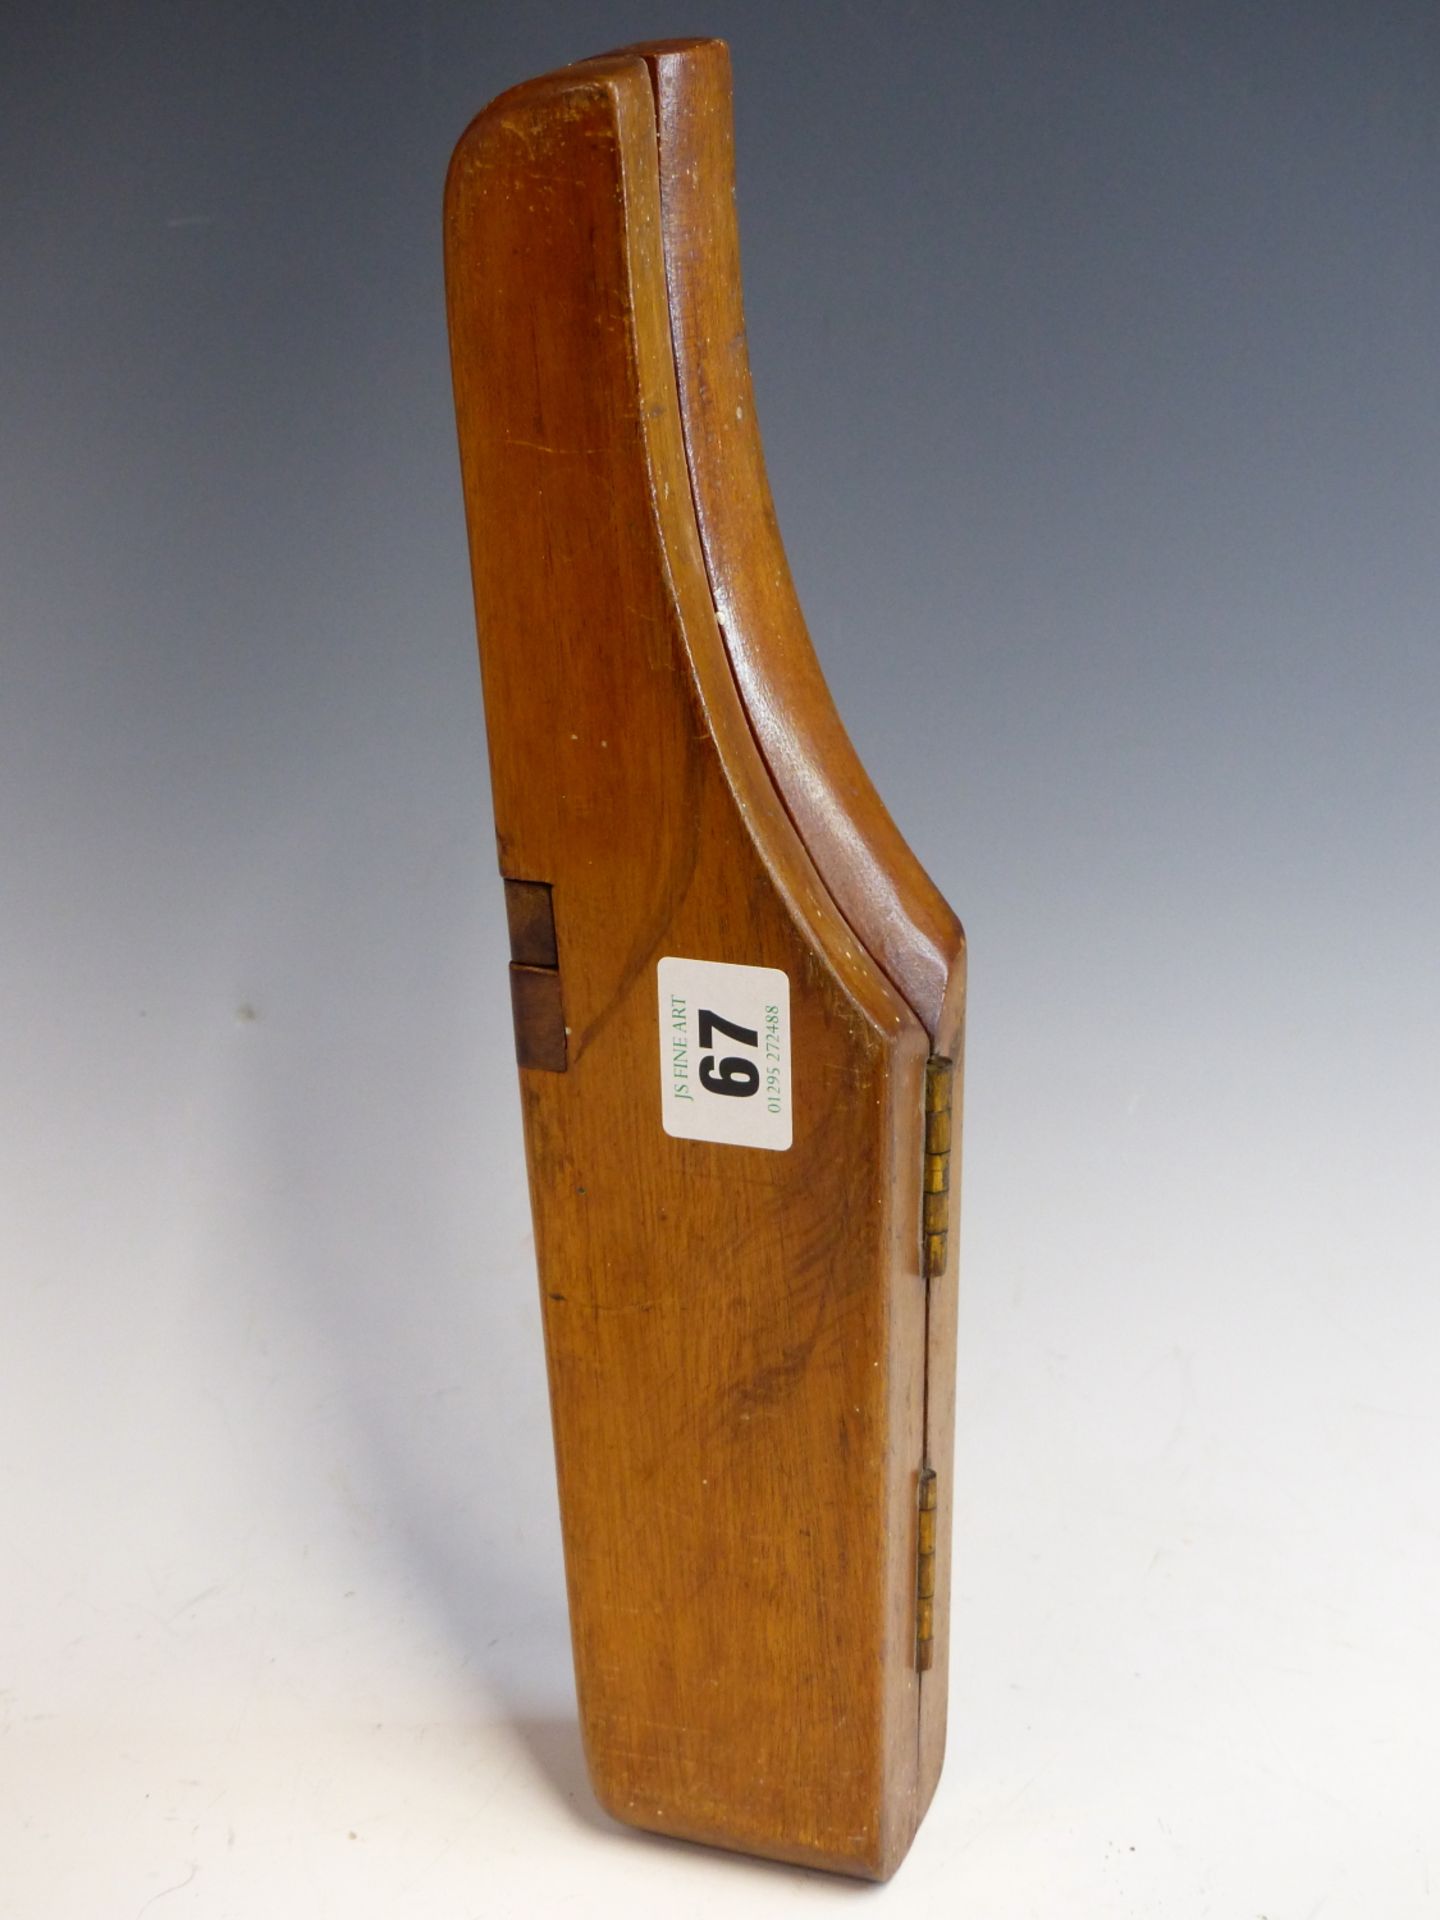 A RARE EARLY 20th CENTURY MAHOGANY OFFICERS CAMPAIGN BOOT JACK WITH FITTED FOLDING BOOT PULLS. - Image 3 of 3